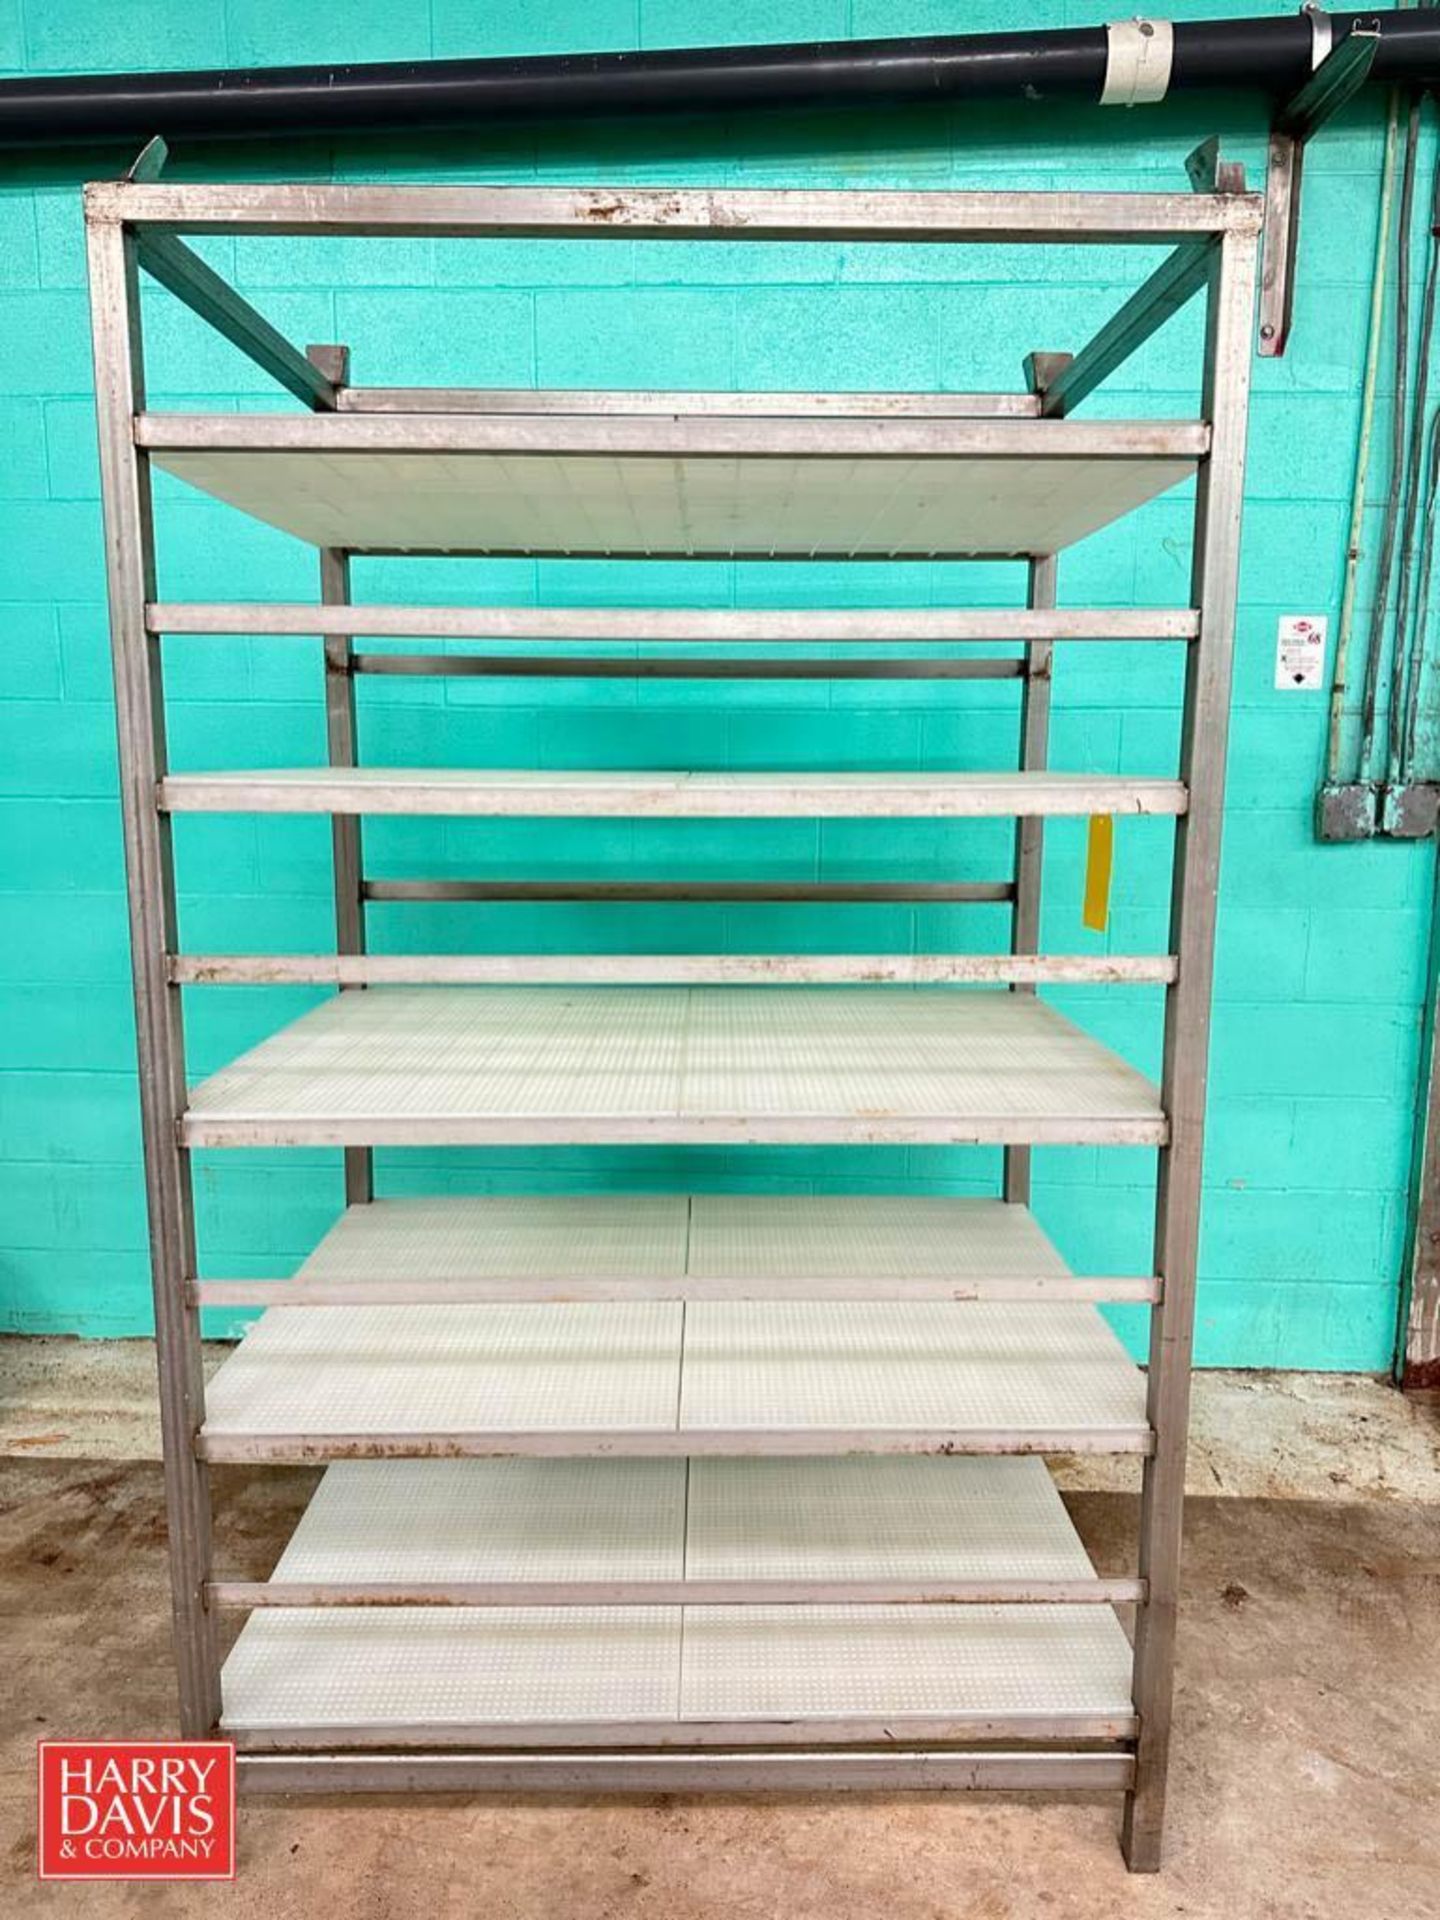 S/S Racks: 74" x 32" x 46" Depth with Poly Shelves and Case Trays